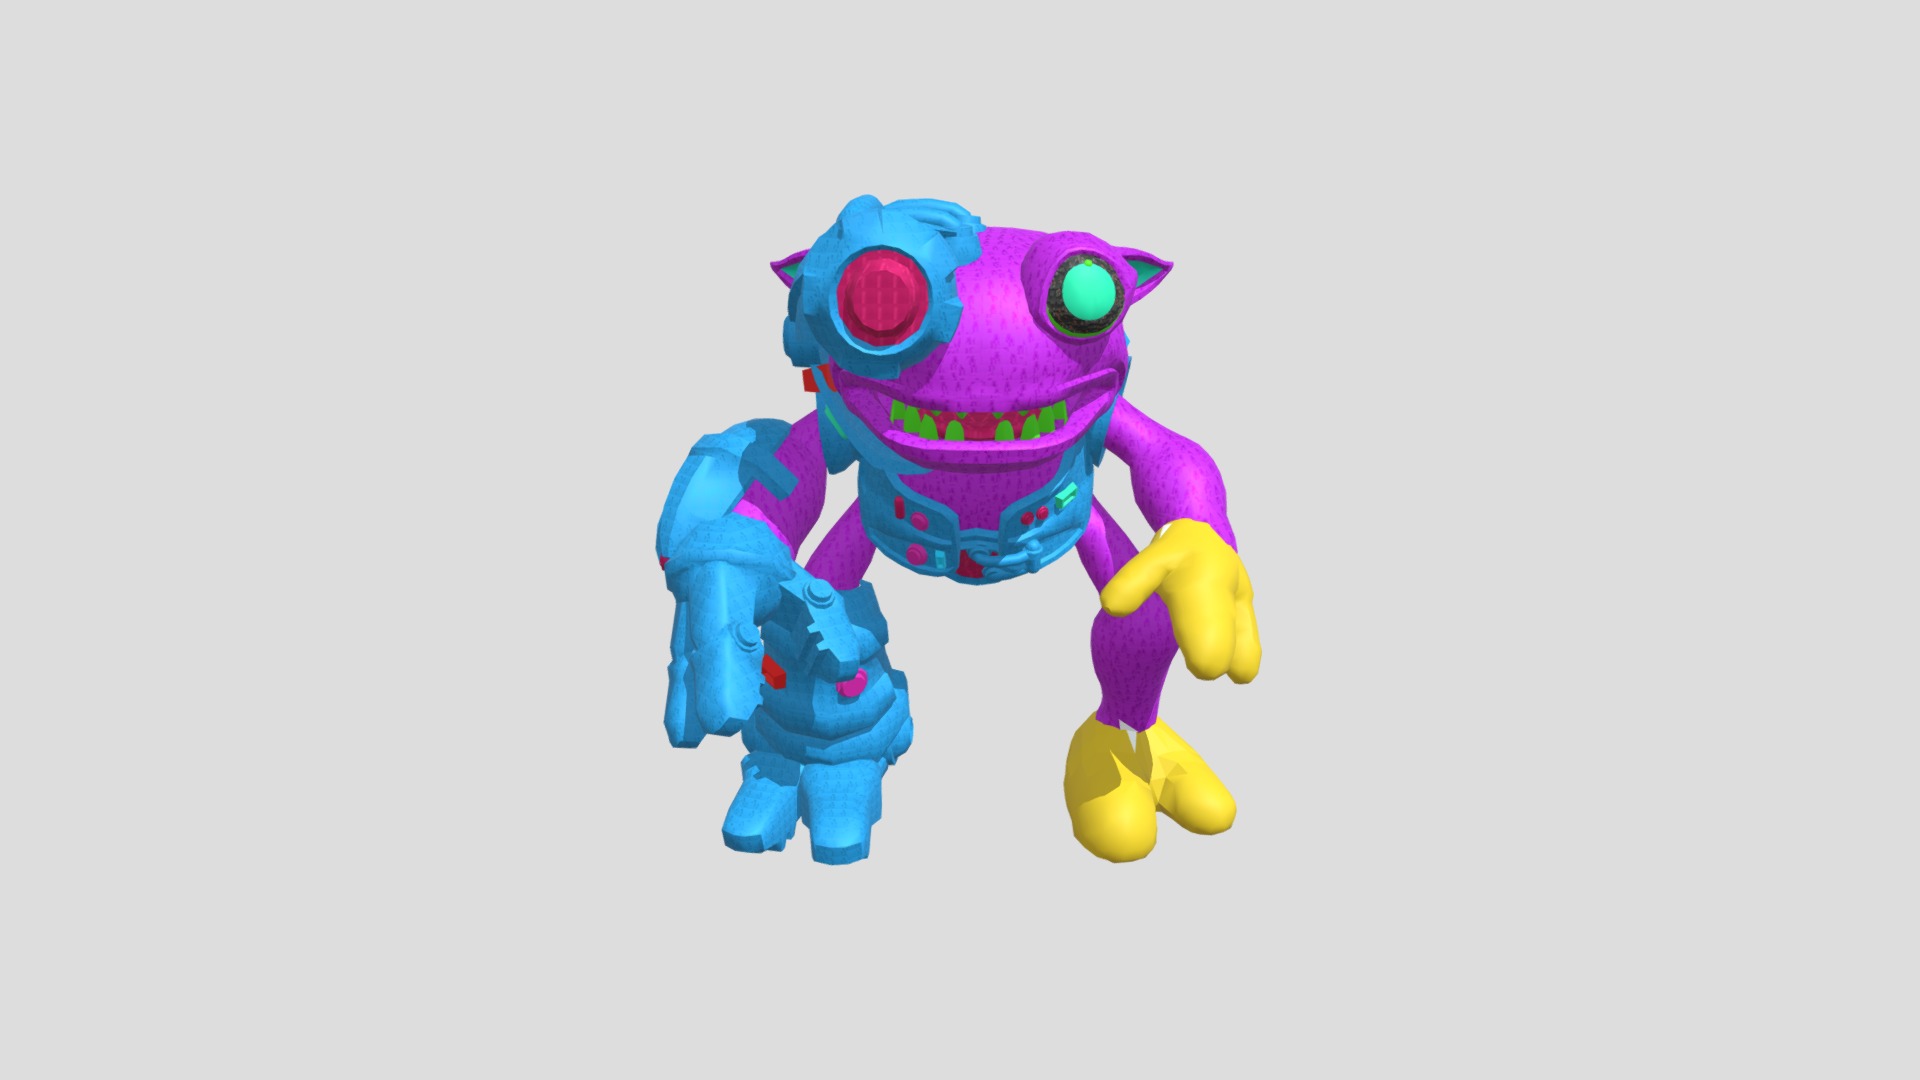 3D model 31-grox - This is a 3D model of the 31-grox. The 3D model is about a blue and yellow toy.